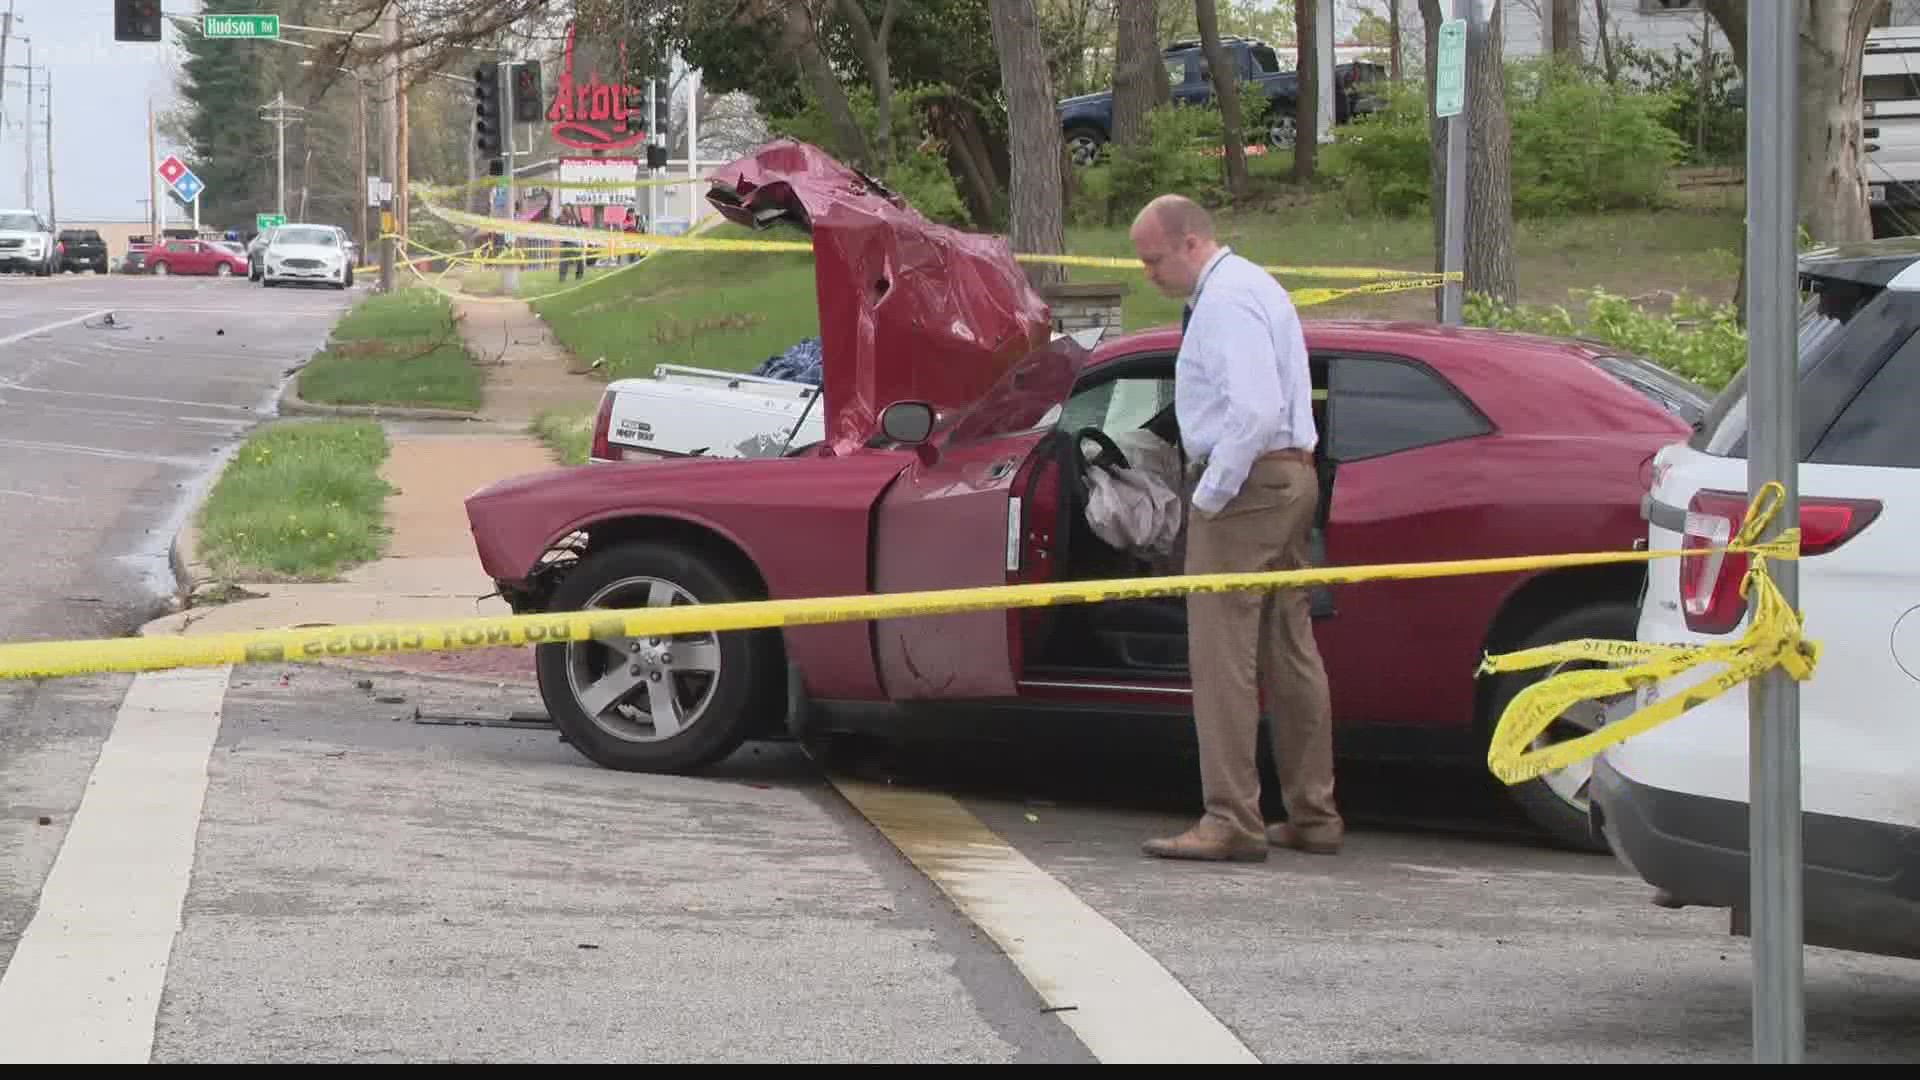 A mother and her 2-year-old son were seriously injured Friday morning after their car was involved in an accident with another vehicle in north St. Louis County.